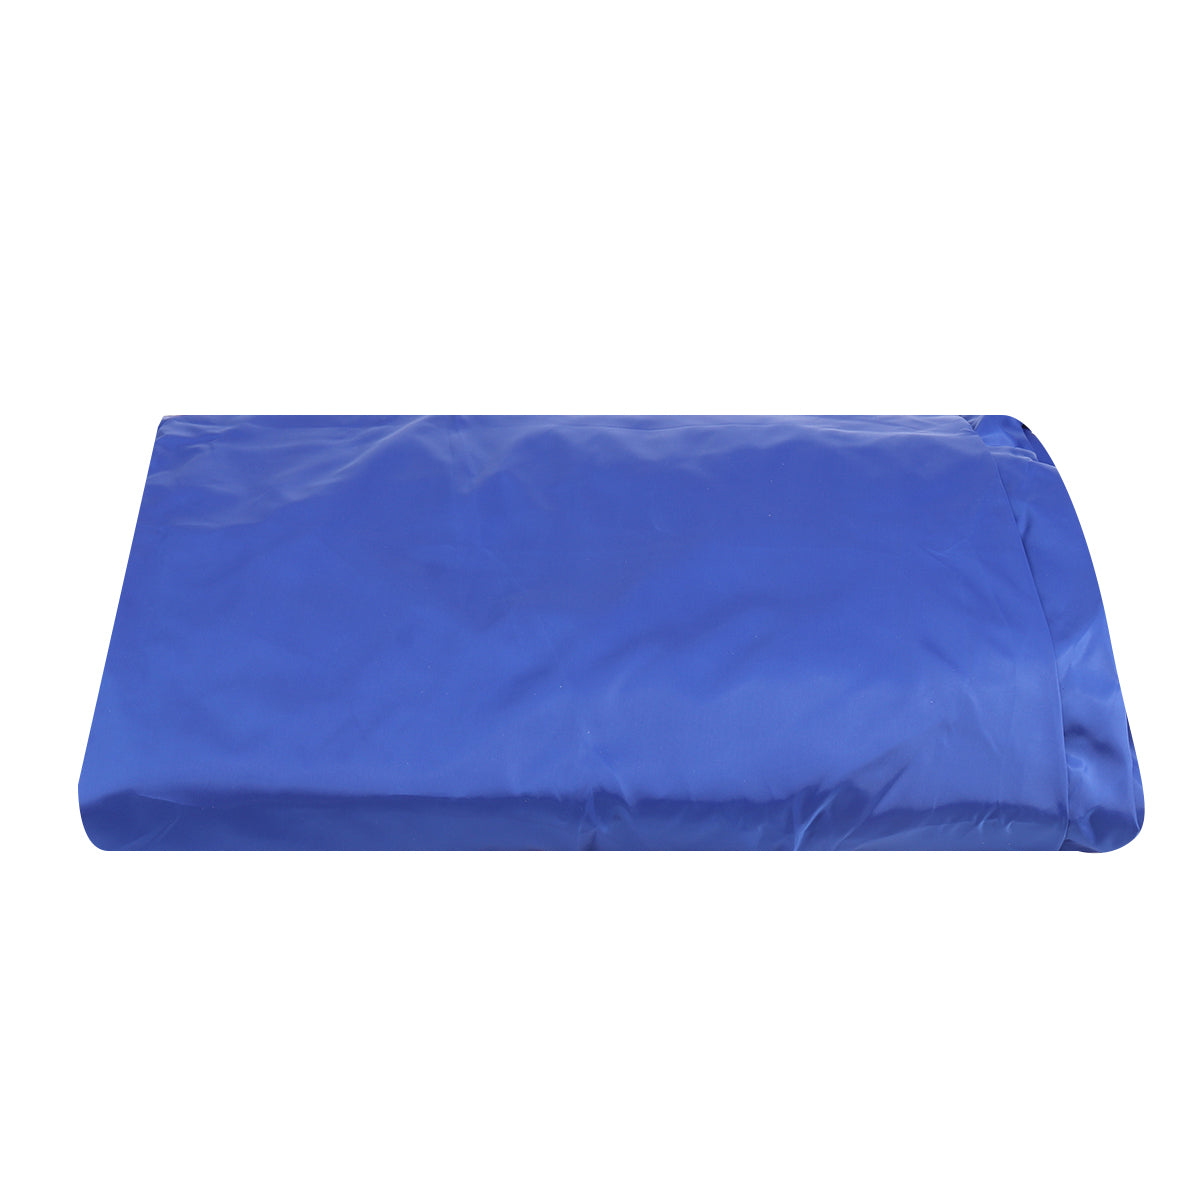 Royal Blue Tennis Ping Pong Table Funiture Cover Indoor Outdoor Protector Waterproof Fabric